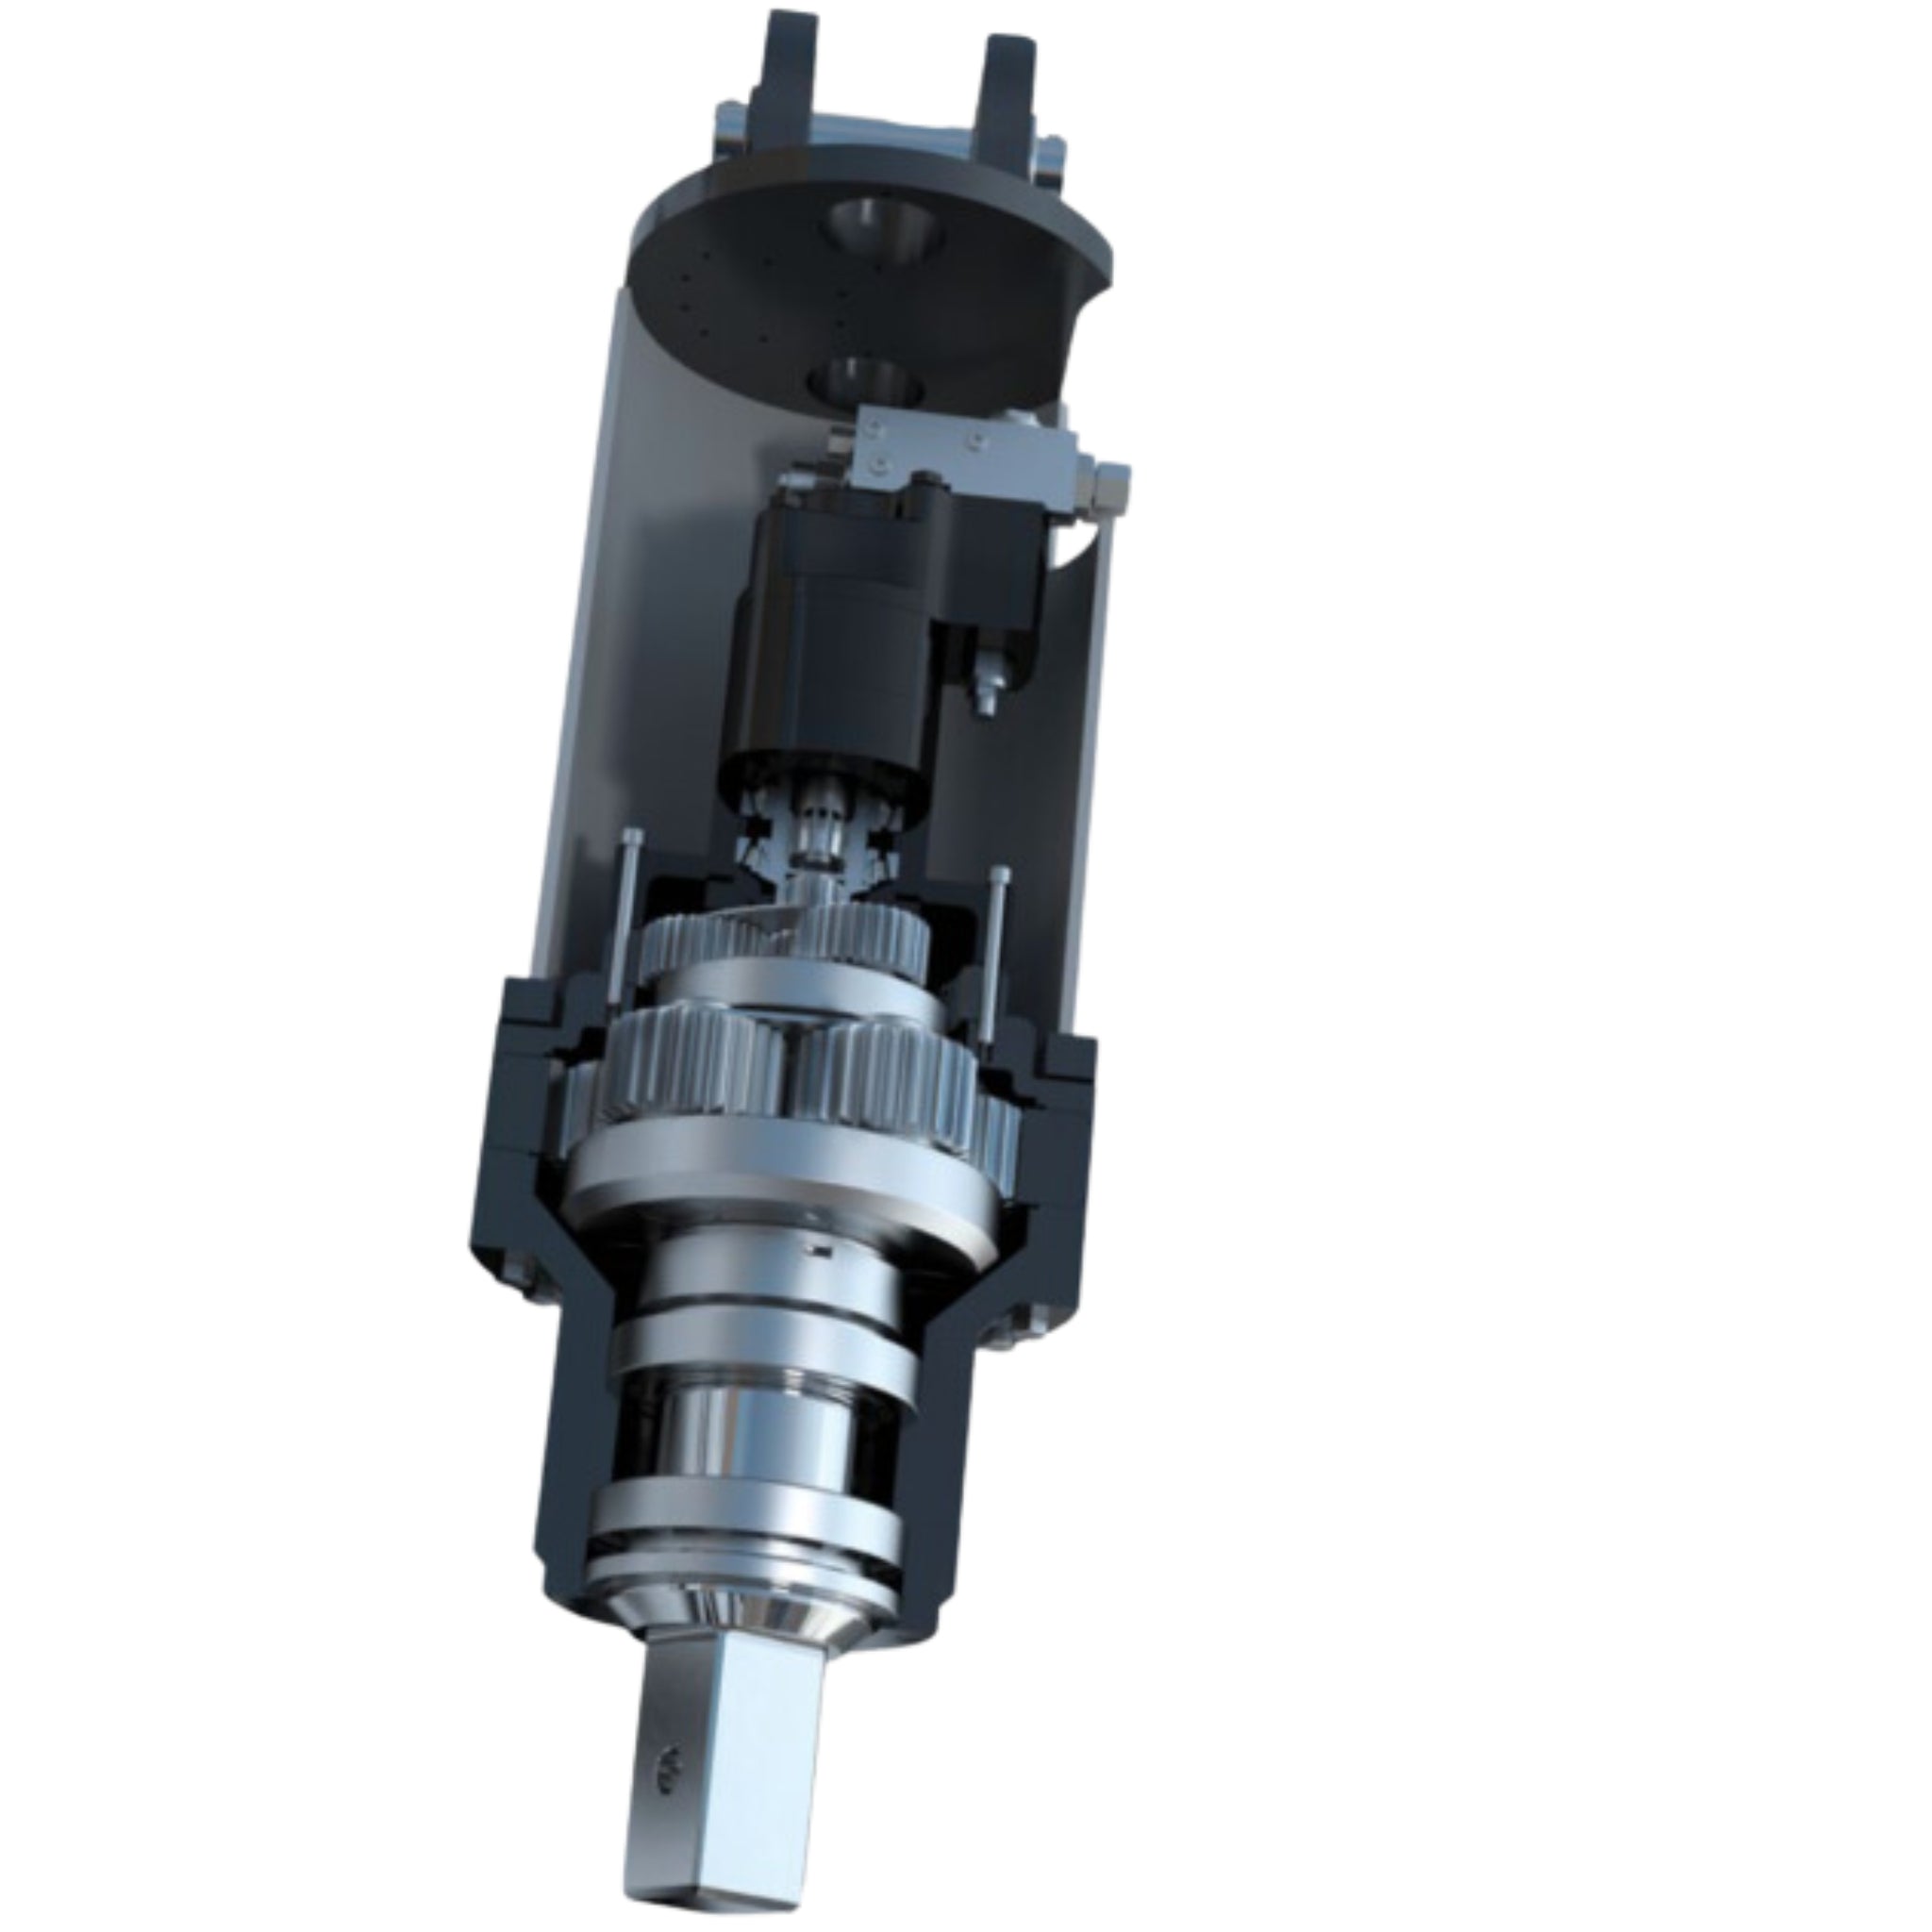 Digga "ADT" 2-Speed Piling Anchor Drive For Excavators